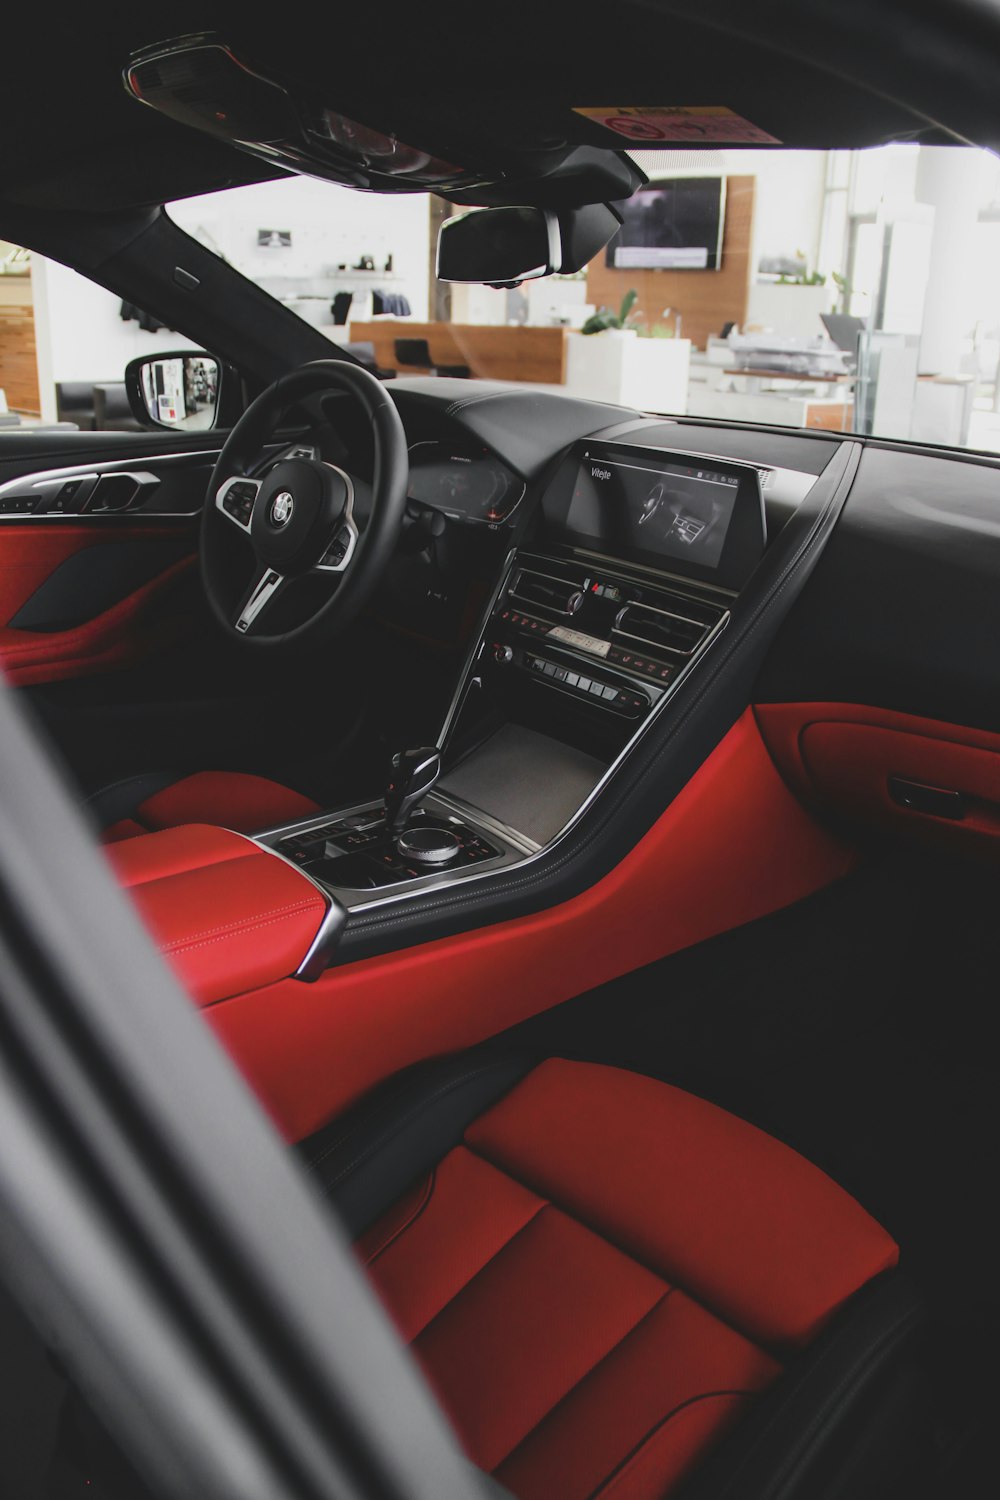 black and red car interior during daytime